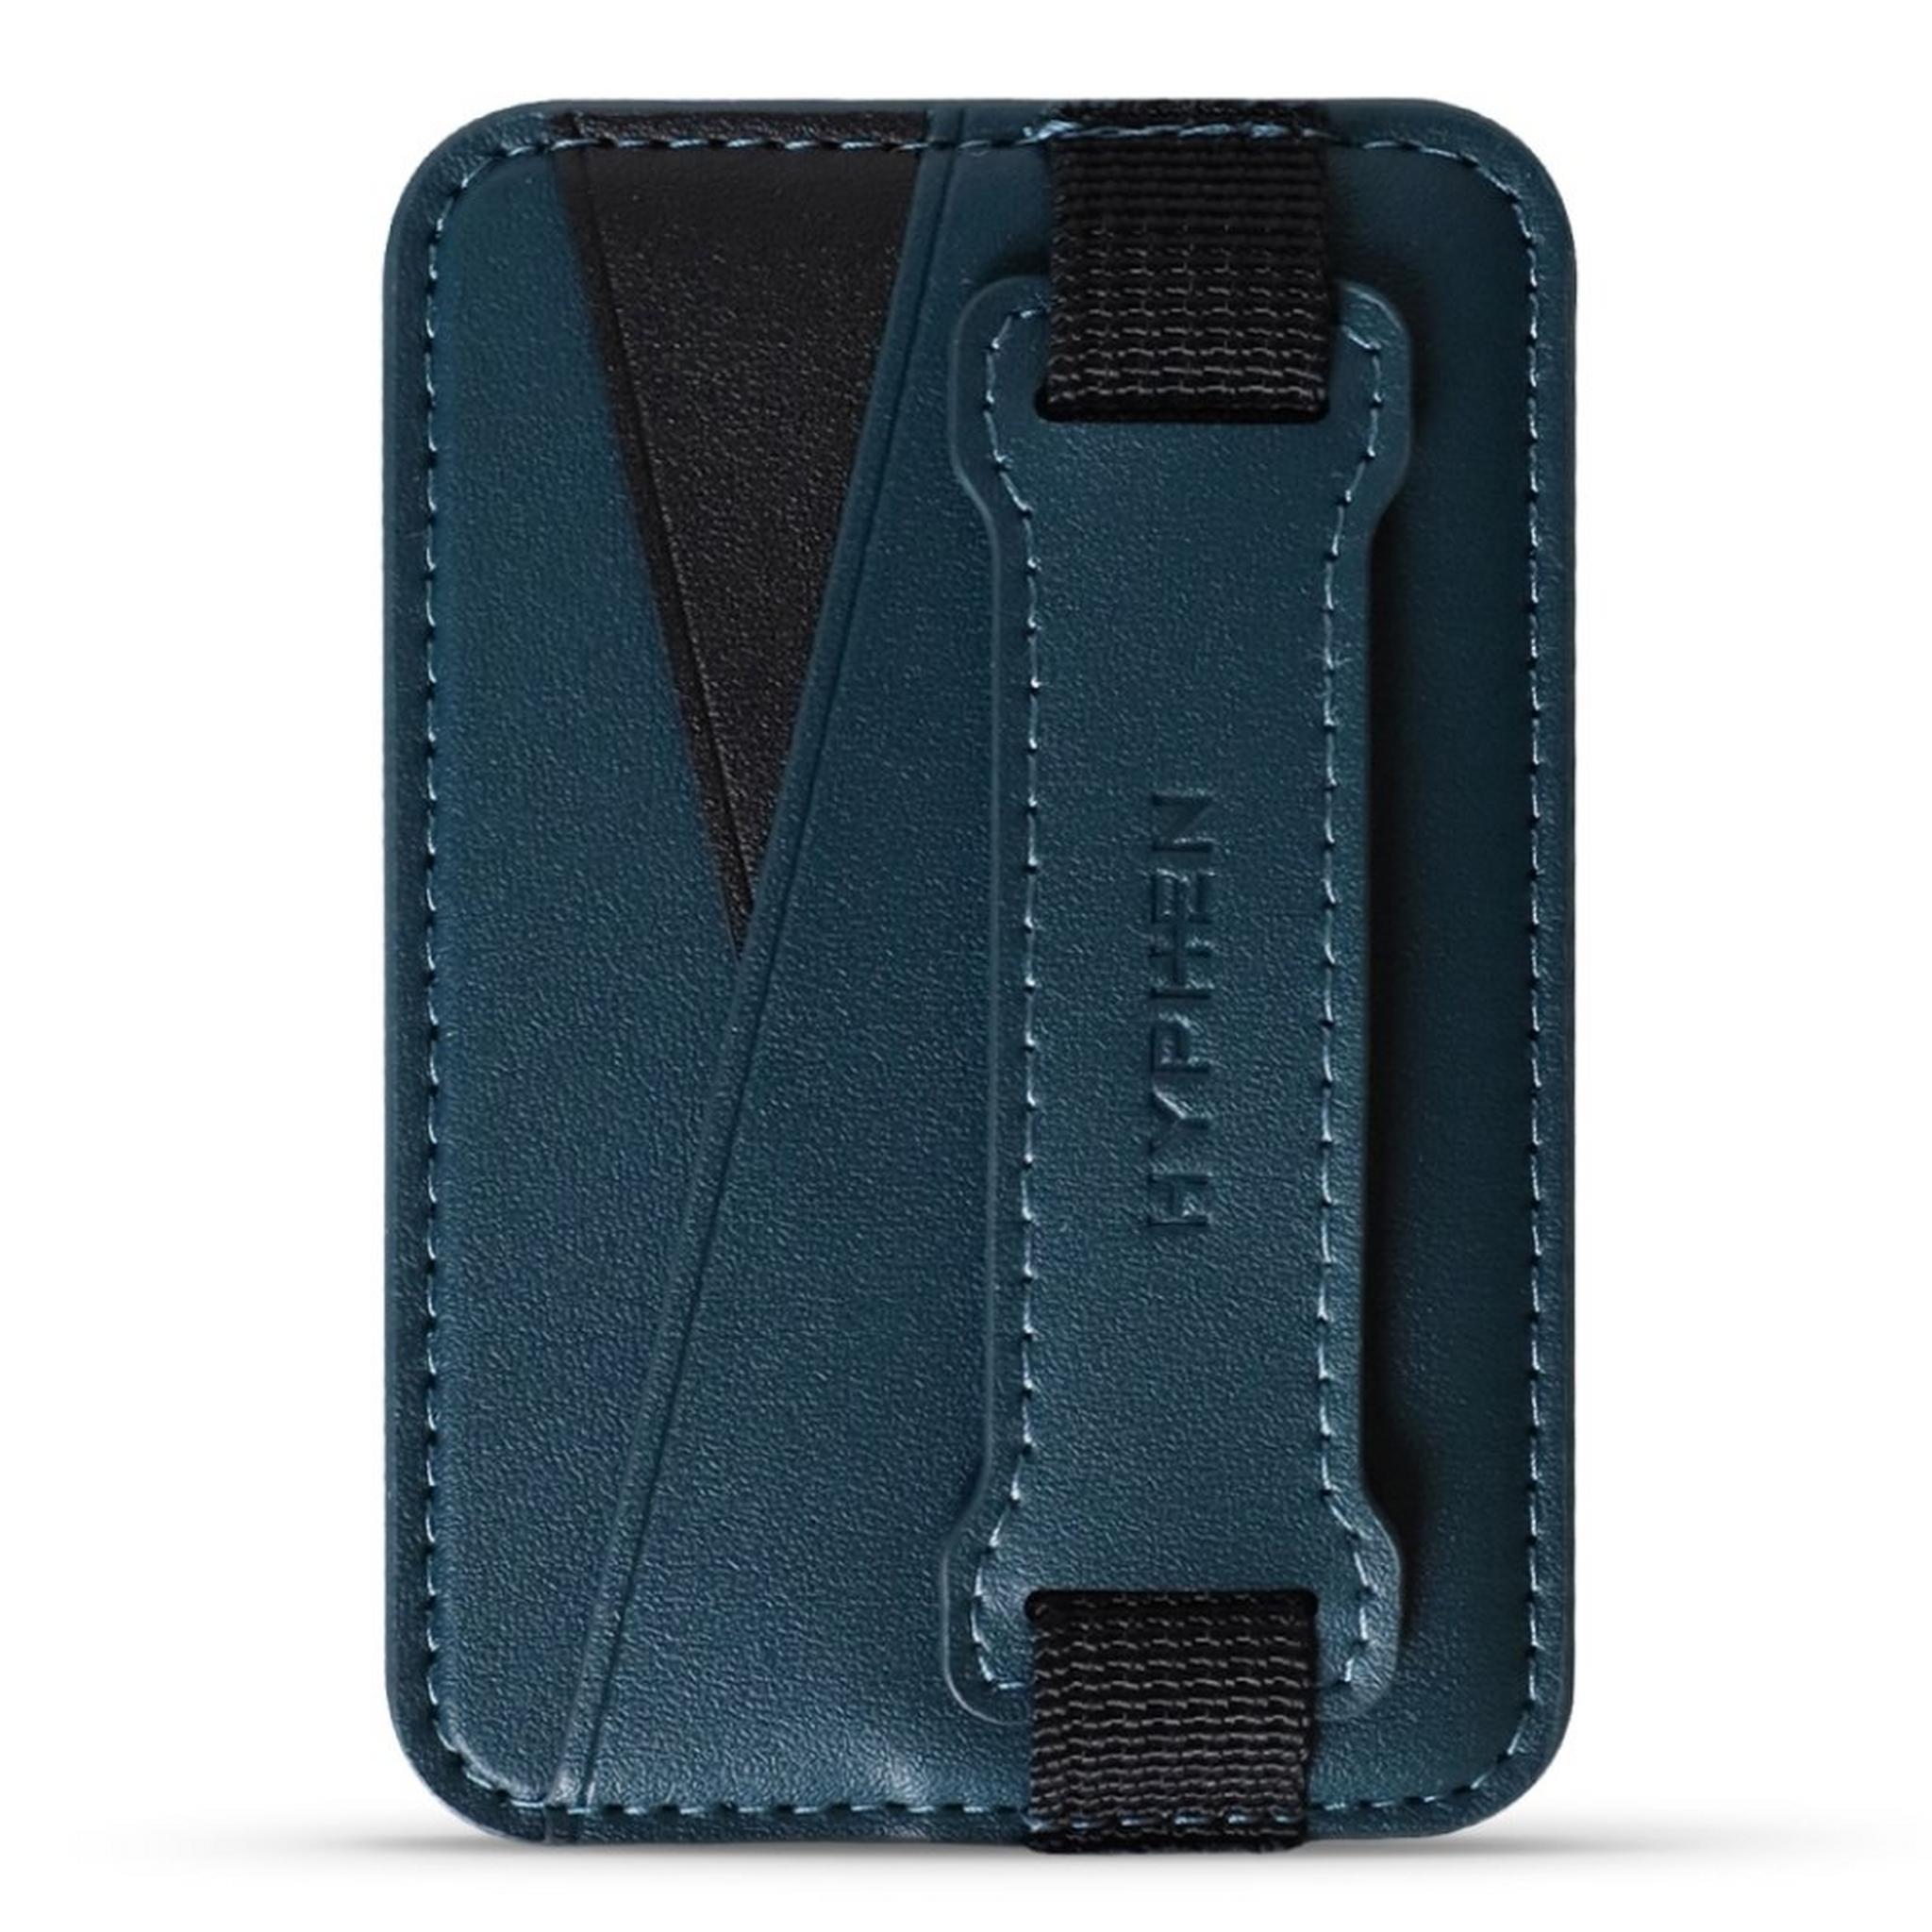 Hyphen MagSafe Wallet – Dual Pocket with Grip | Blue